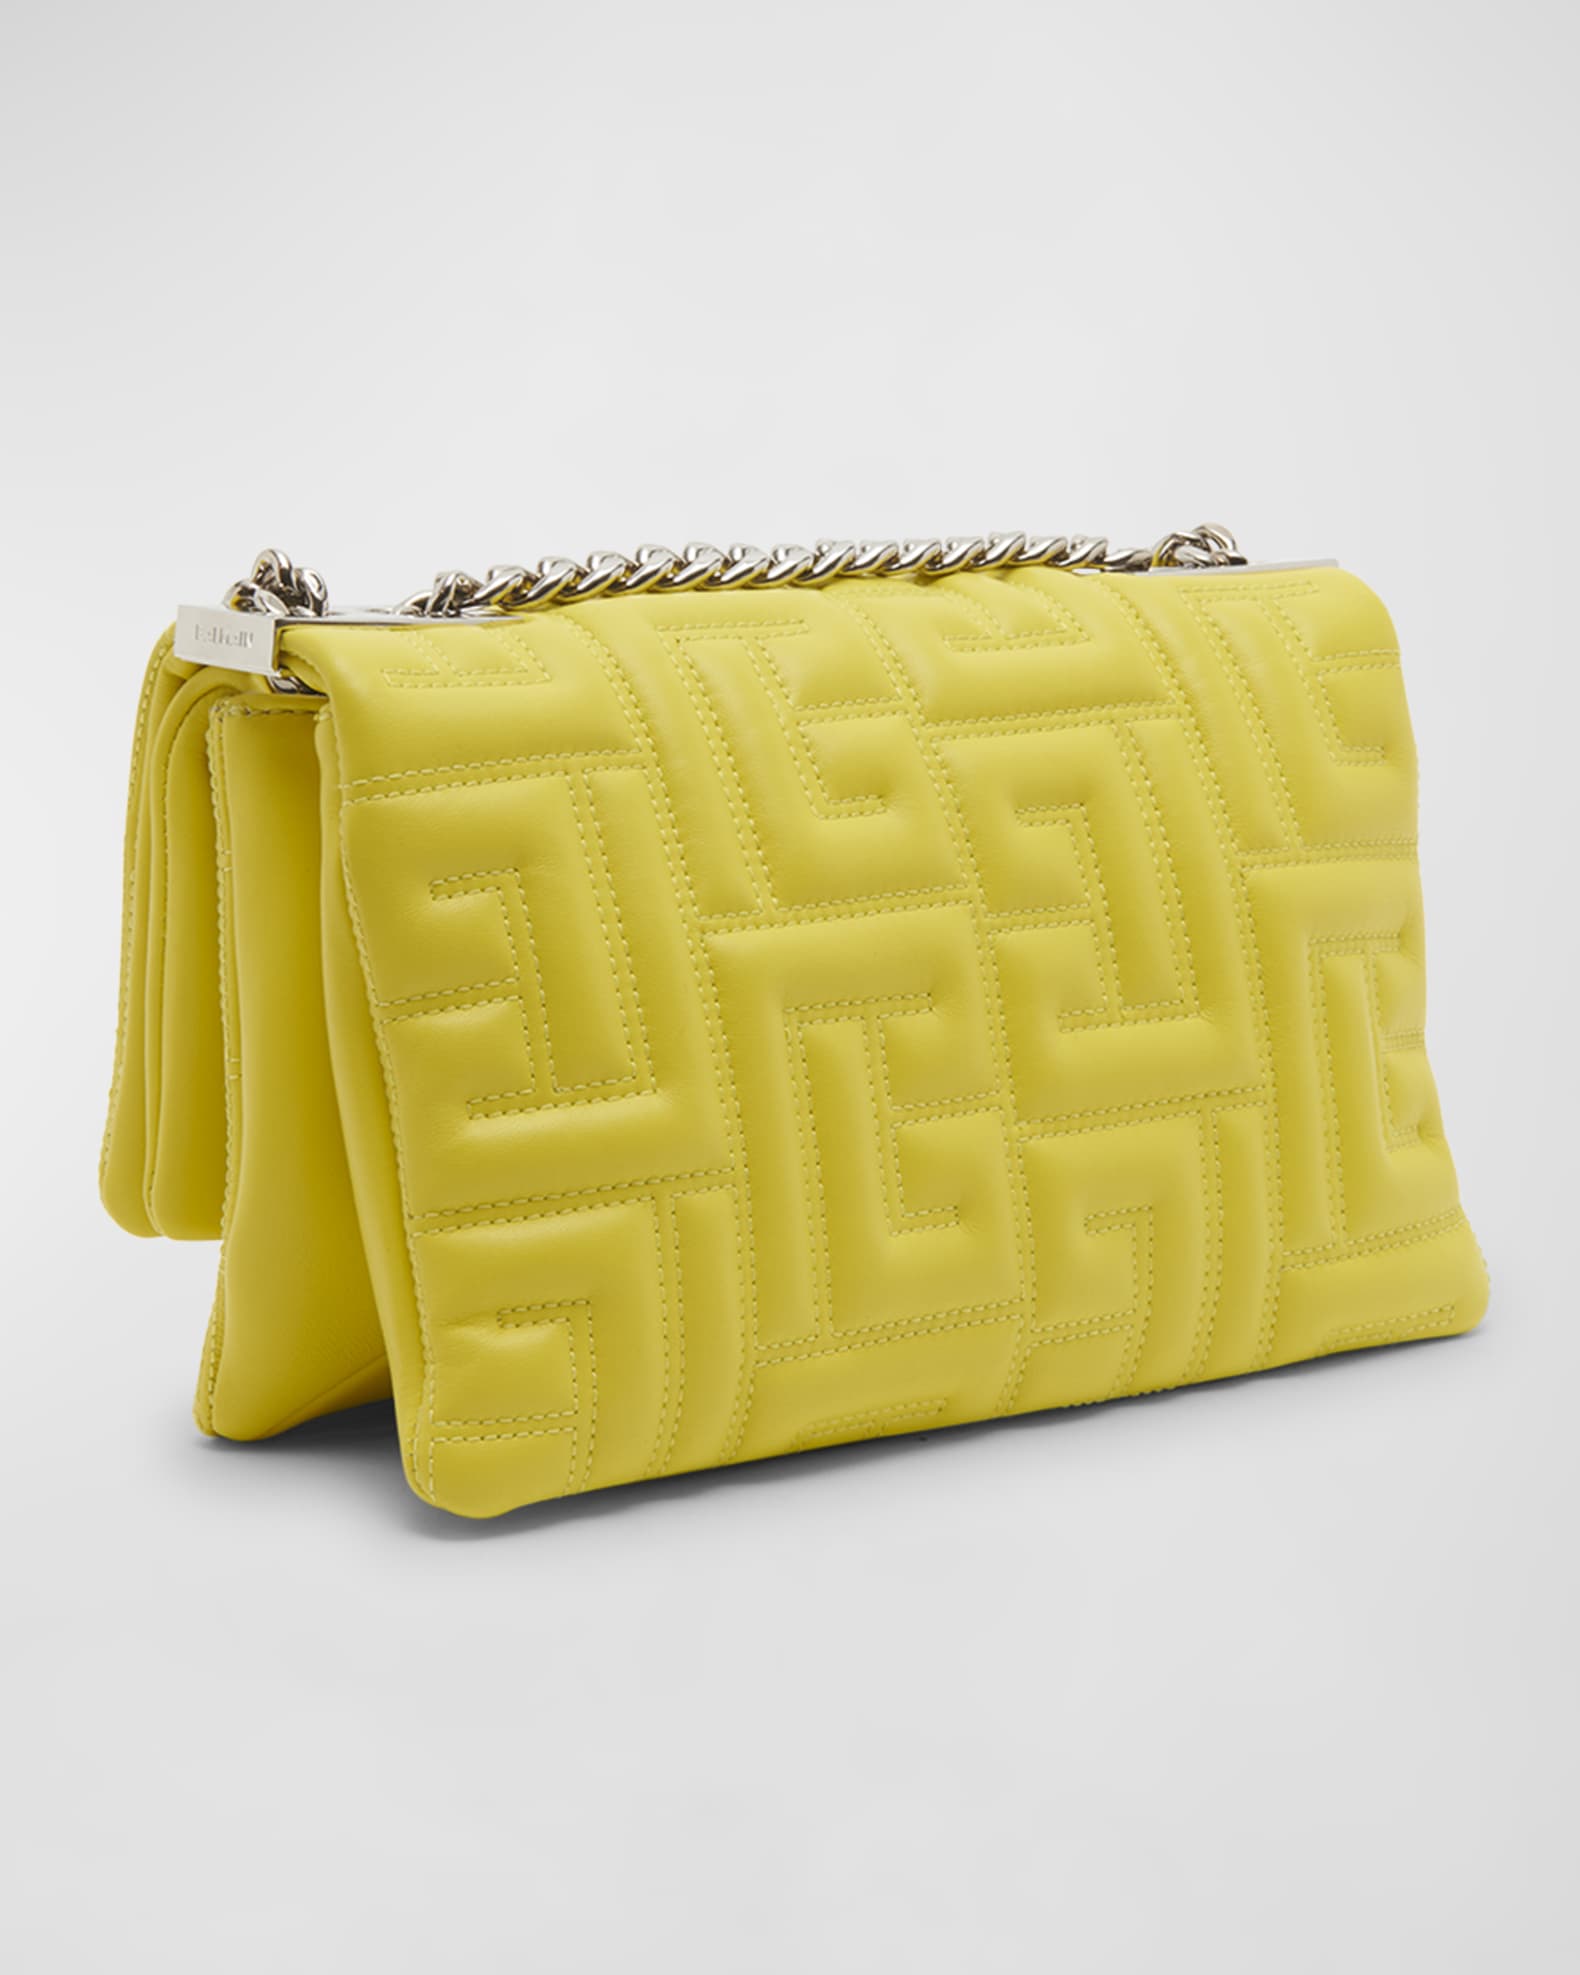 Balmain 1945 Small Quilted Monogram Leather Shoulder Bag | Neiman Marcus